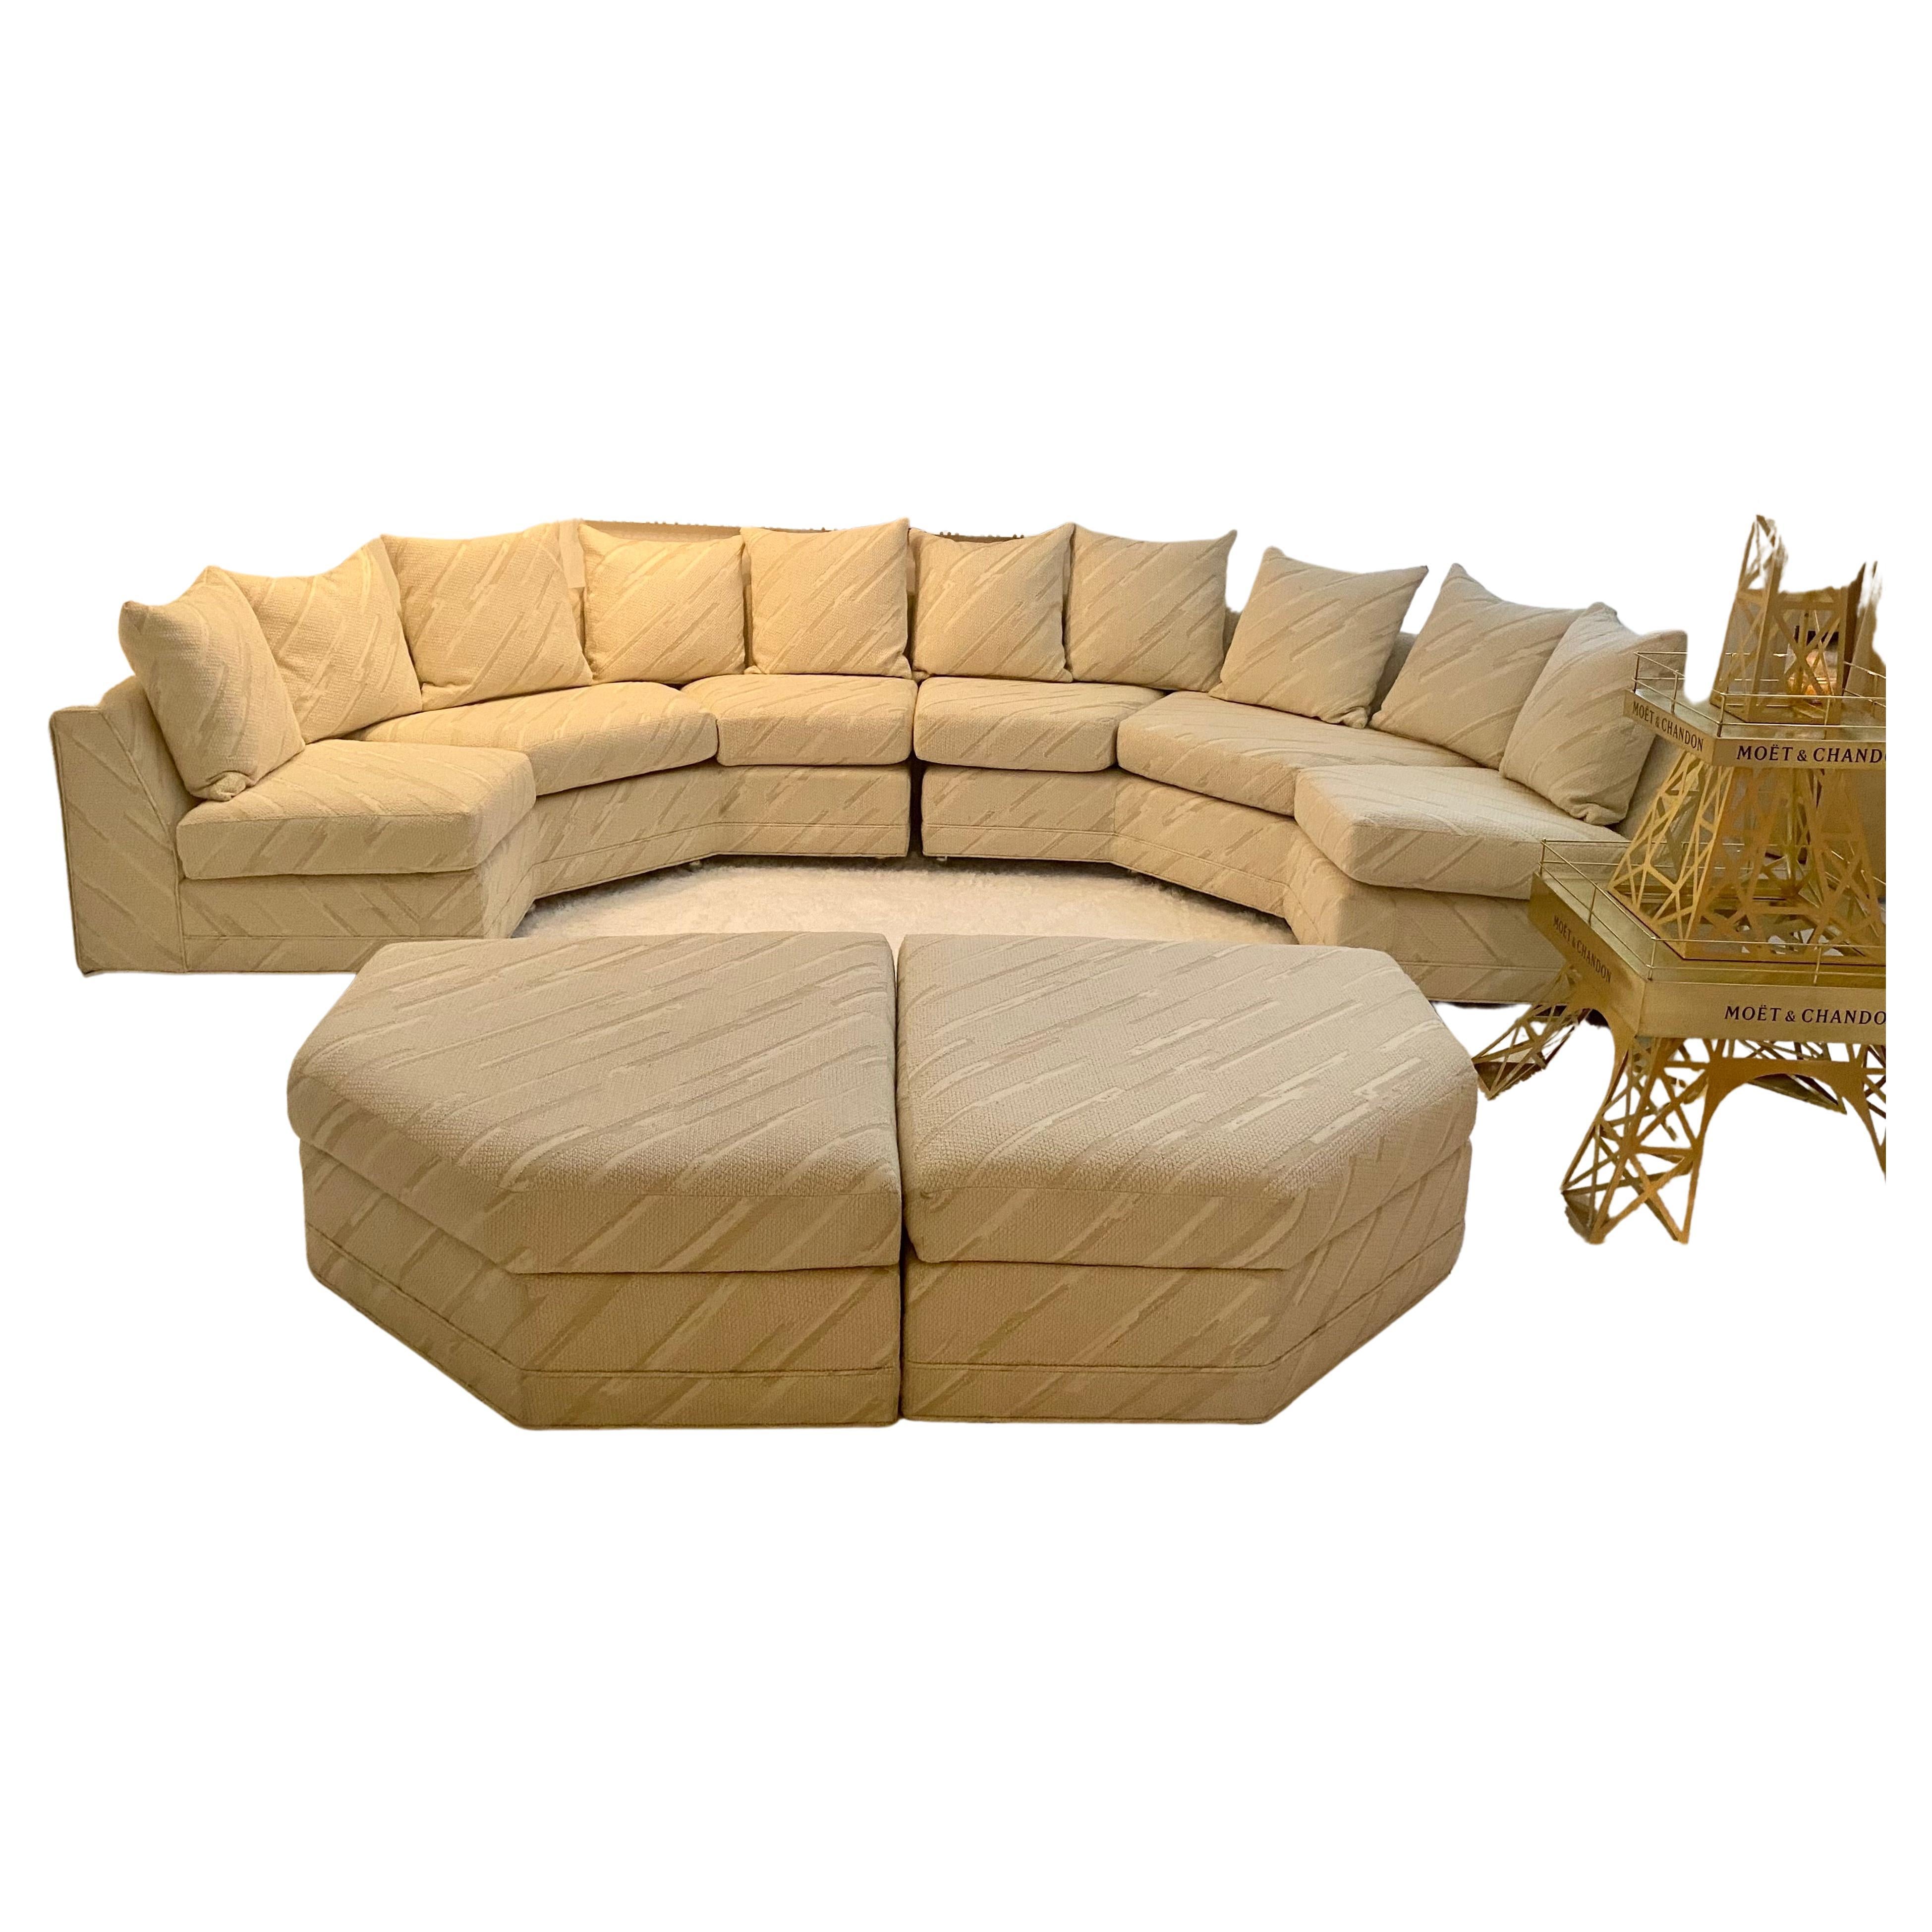 An authentic Mid-Century Modern custom made curved sofa sectional with ottomans and original upholstery in great condition. The upholstery has no stains or holes. This set was custom made for a Miami Beach private residence, and is of high quality.